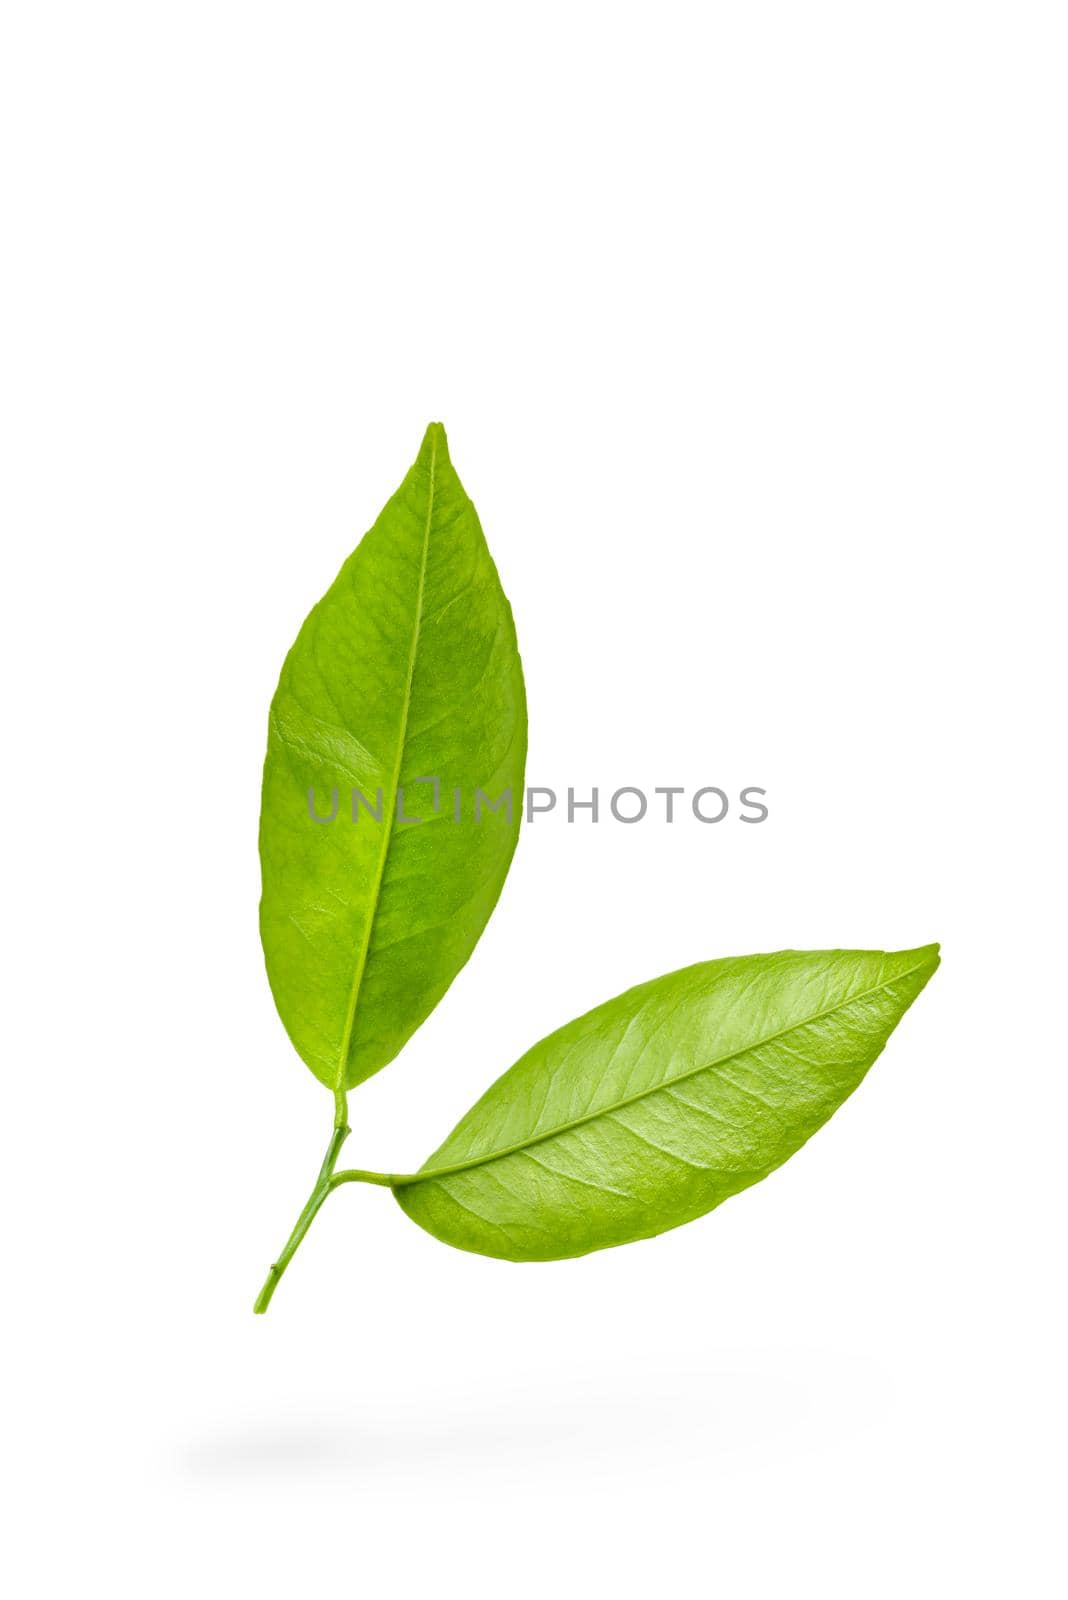 Mandarin leaves. Green leaves of a tangerine tree on a white isolated background. Two leaves dangle casting a shadow by SERSOL